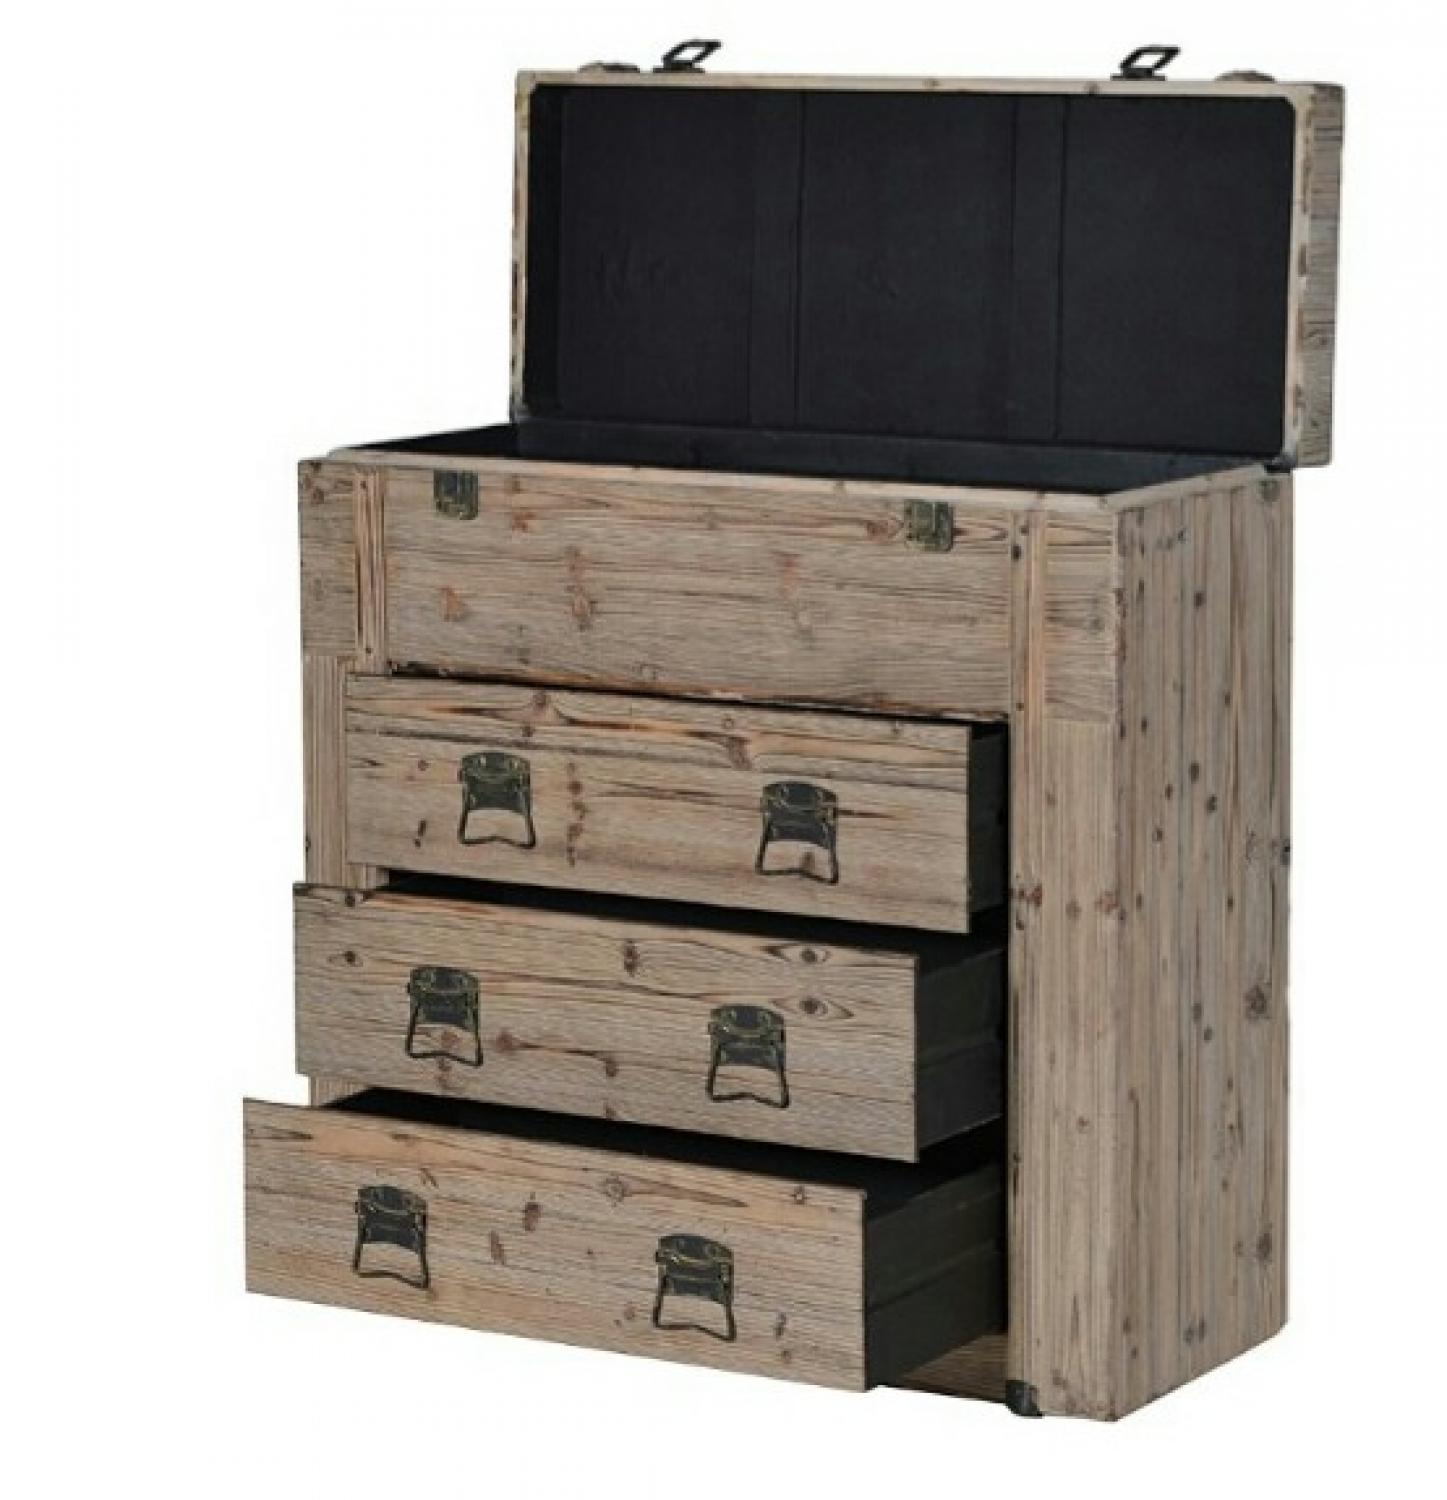 Rustic opening top chest